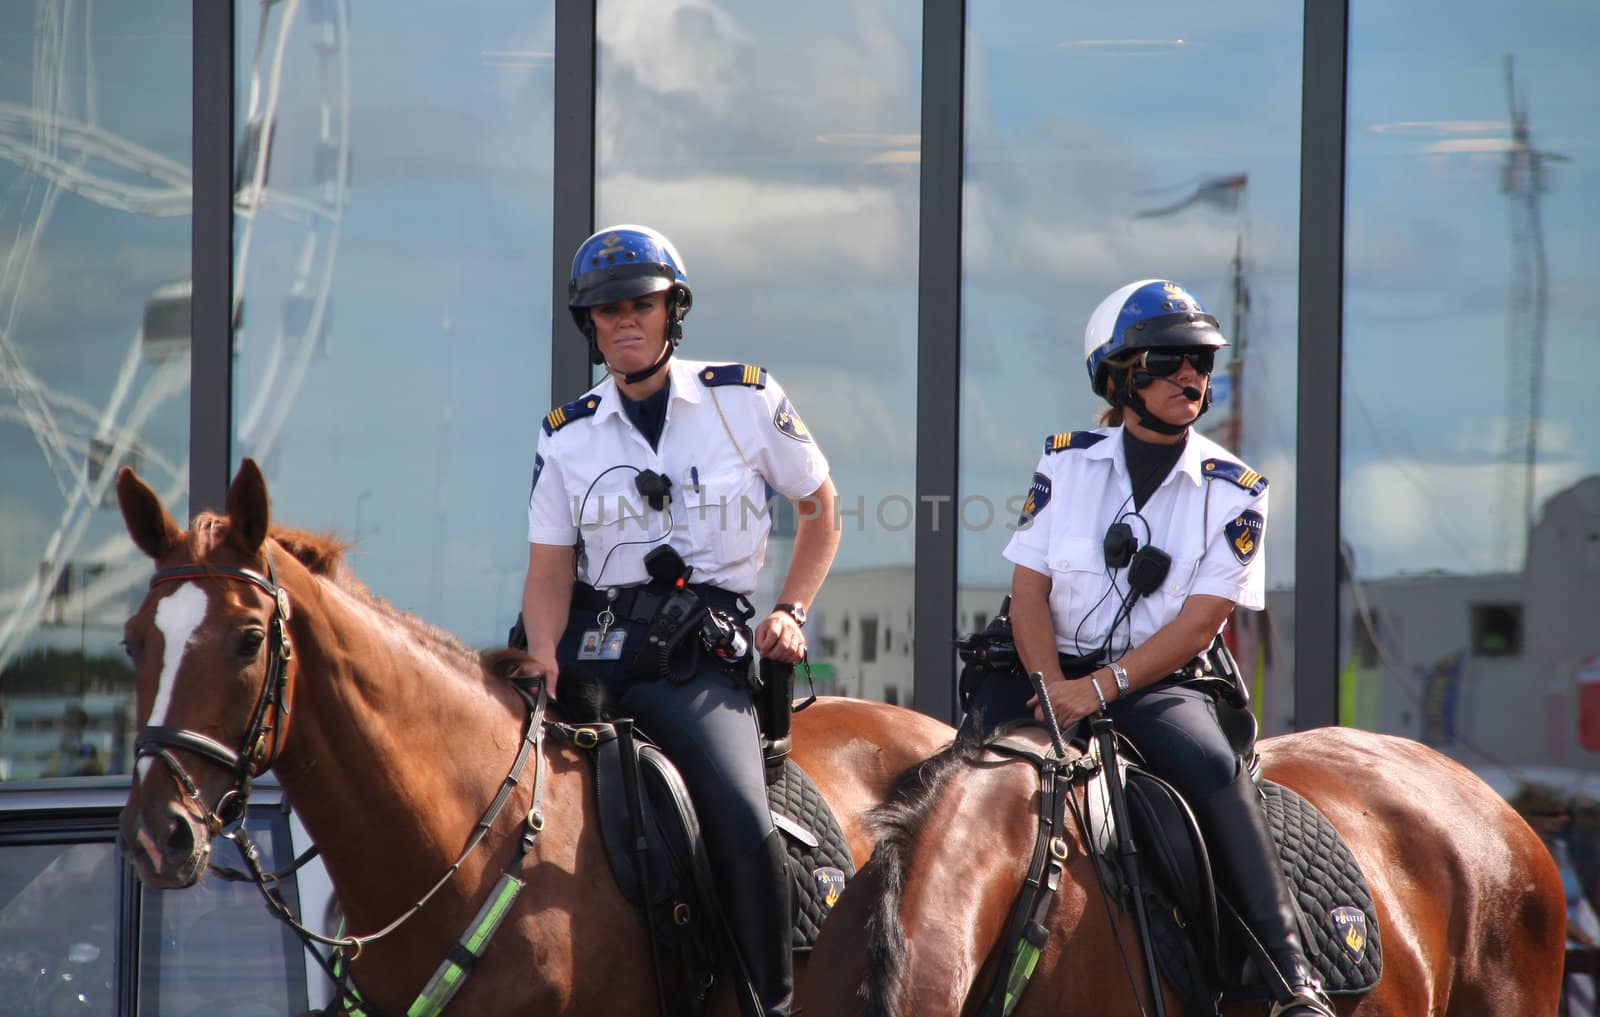 AMSTERDAM, AUGUST 19, 2010: Female police officers on horseback watch the crowd at Sail 2010 in Amsterdam, Holland on august 19, 2010